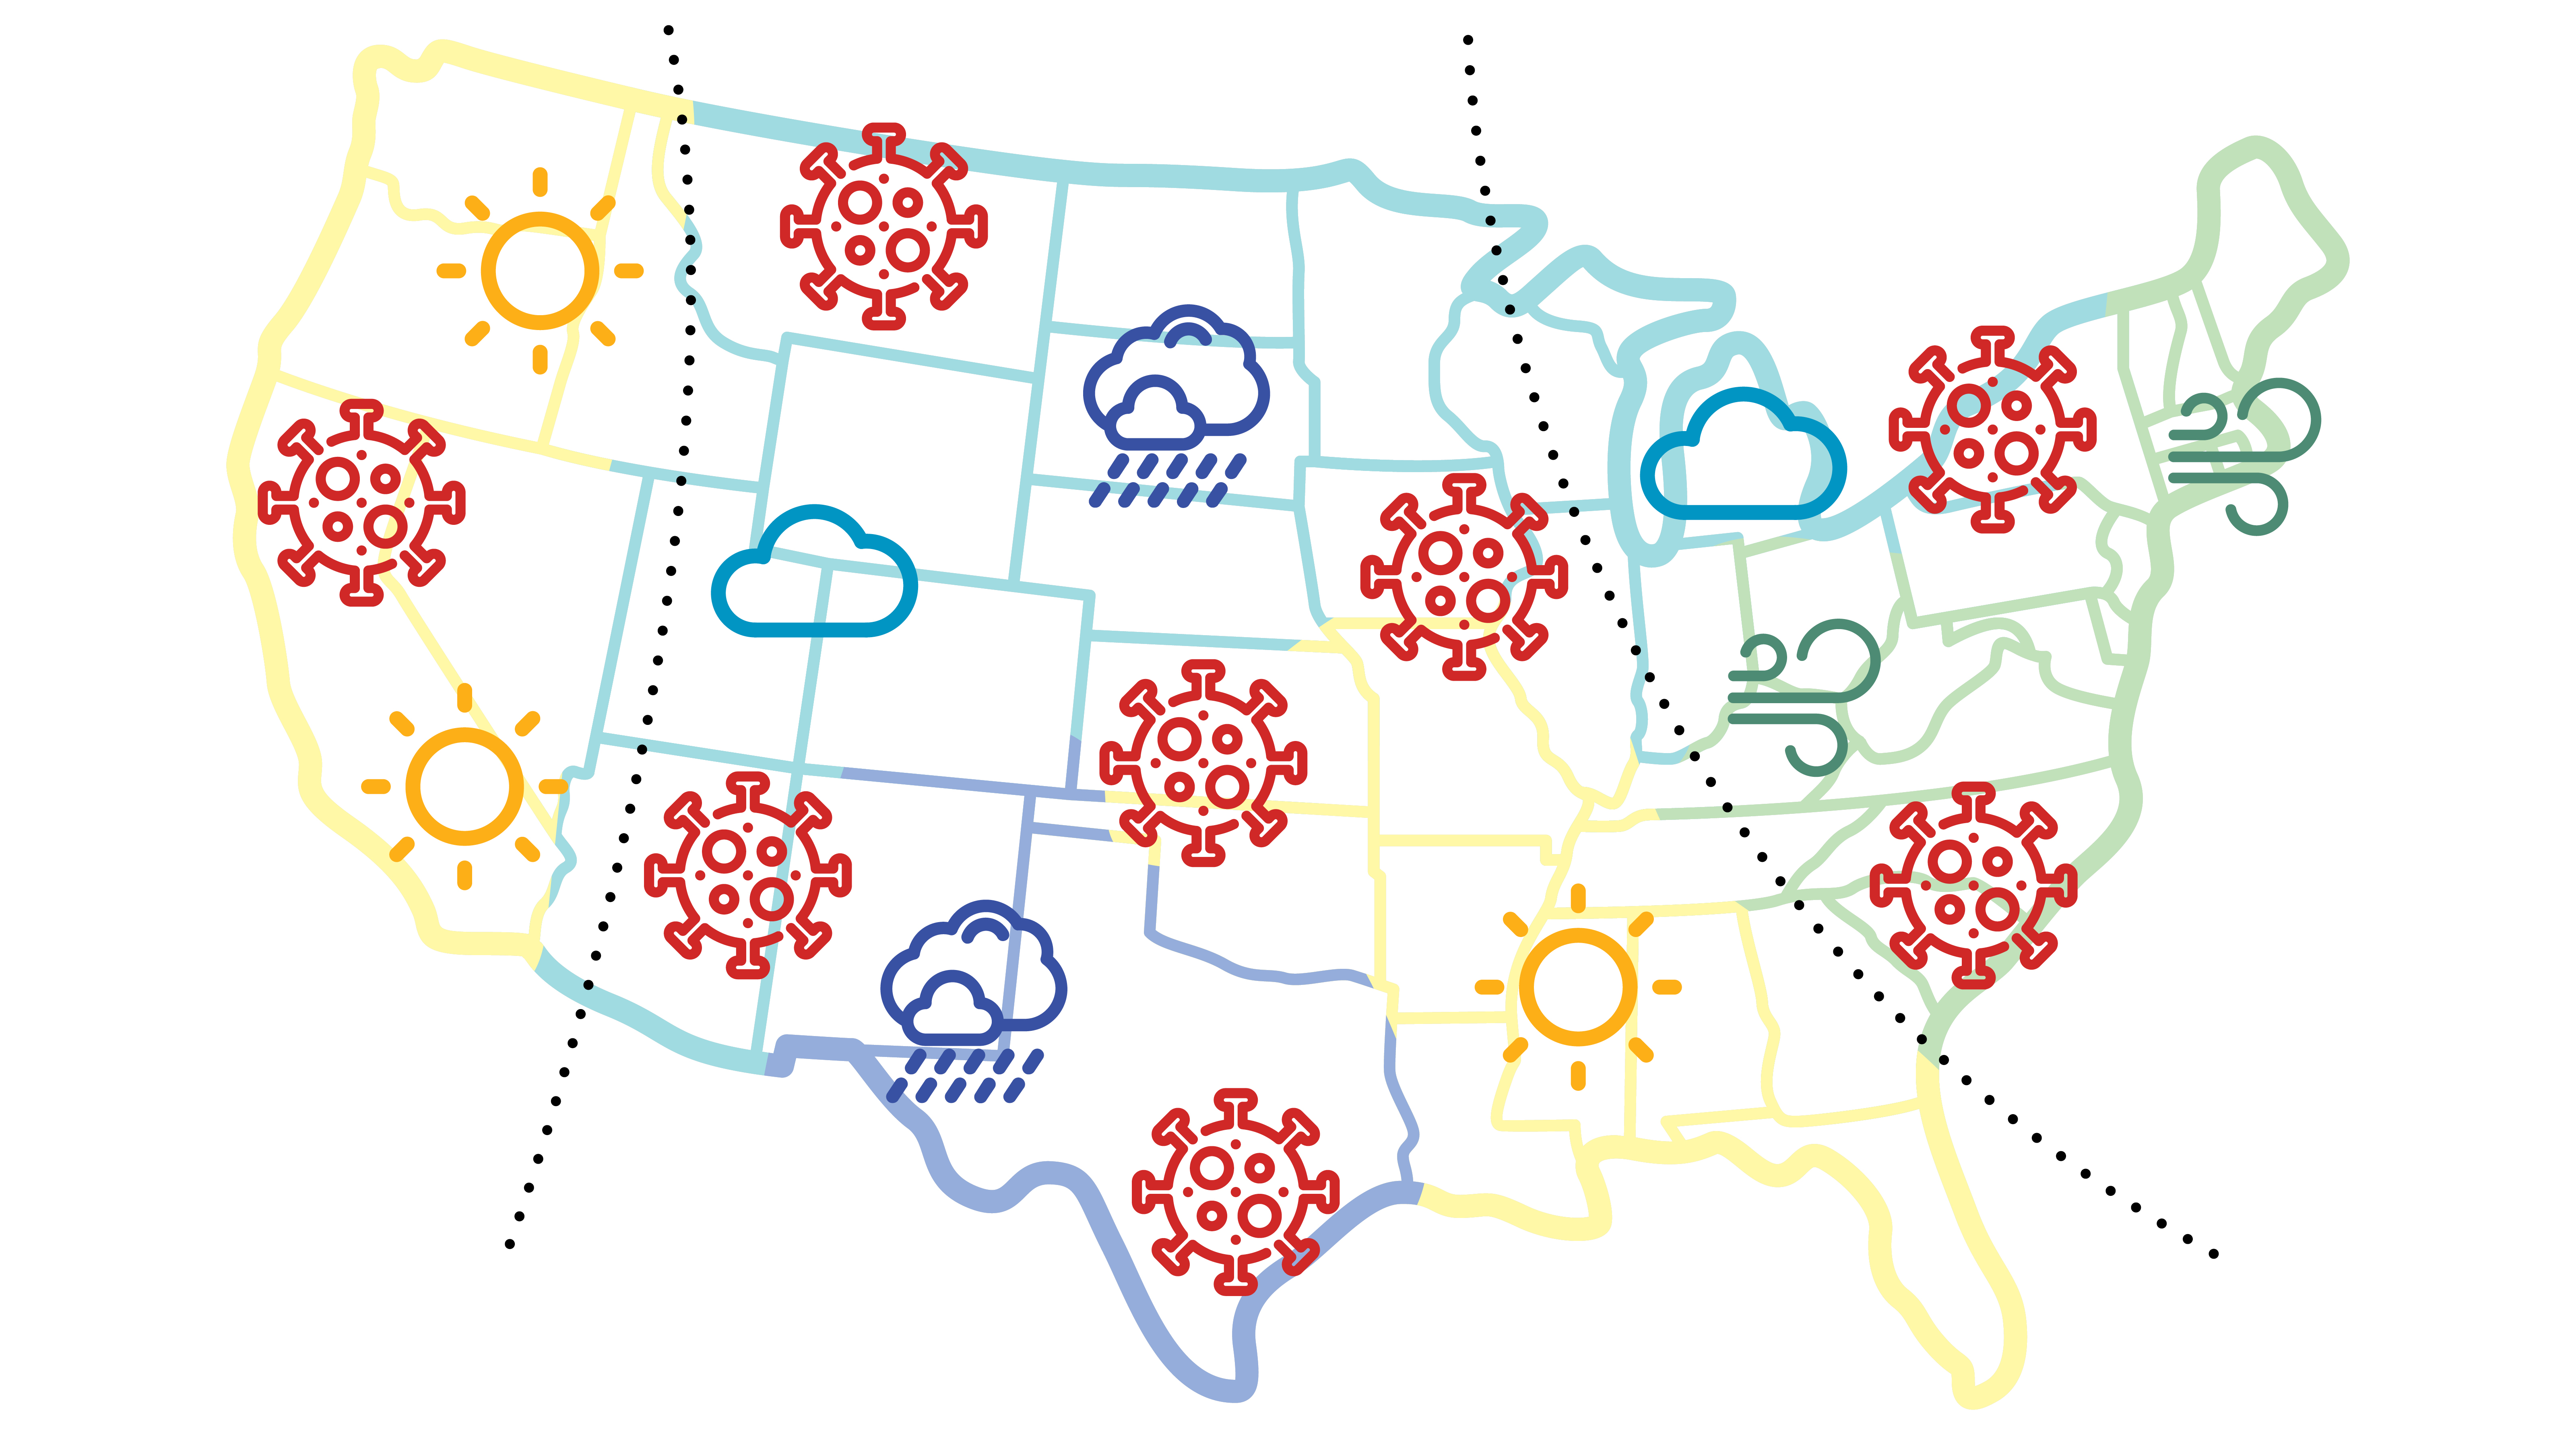 Illustration of a traditional weather map of the United States with several Covid-19 cells replacing regular weather patterns.